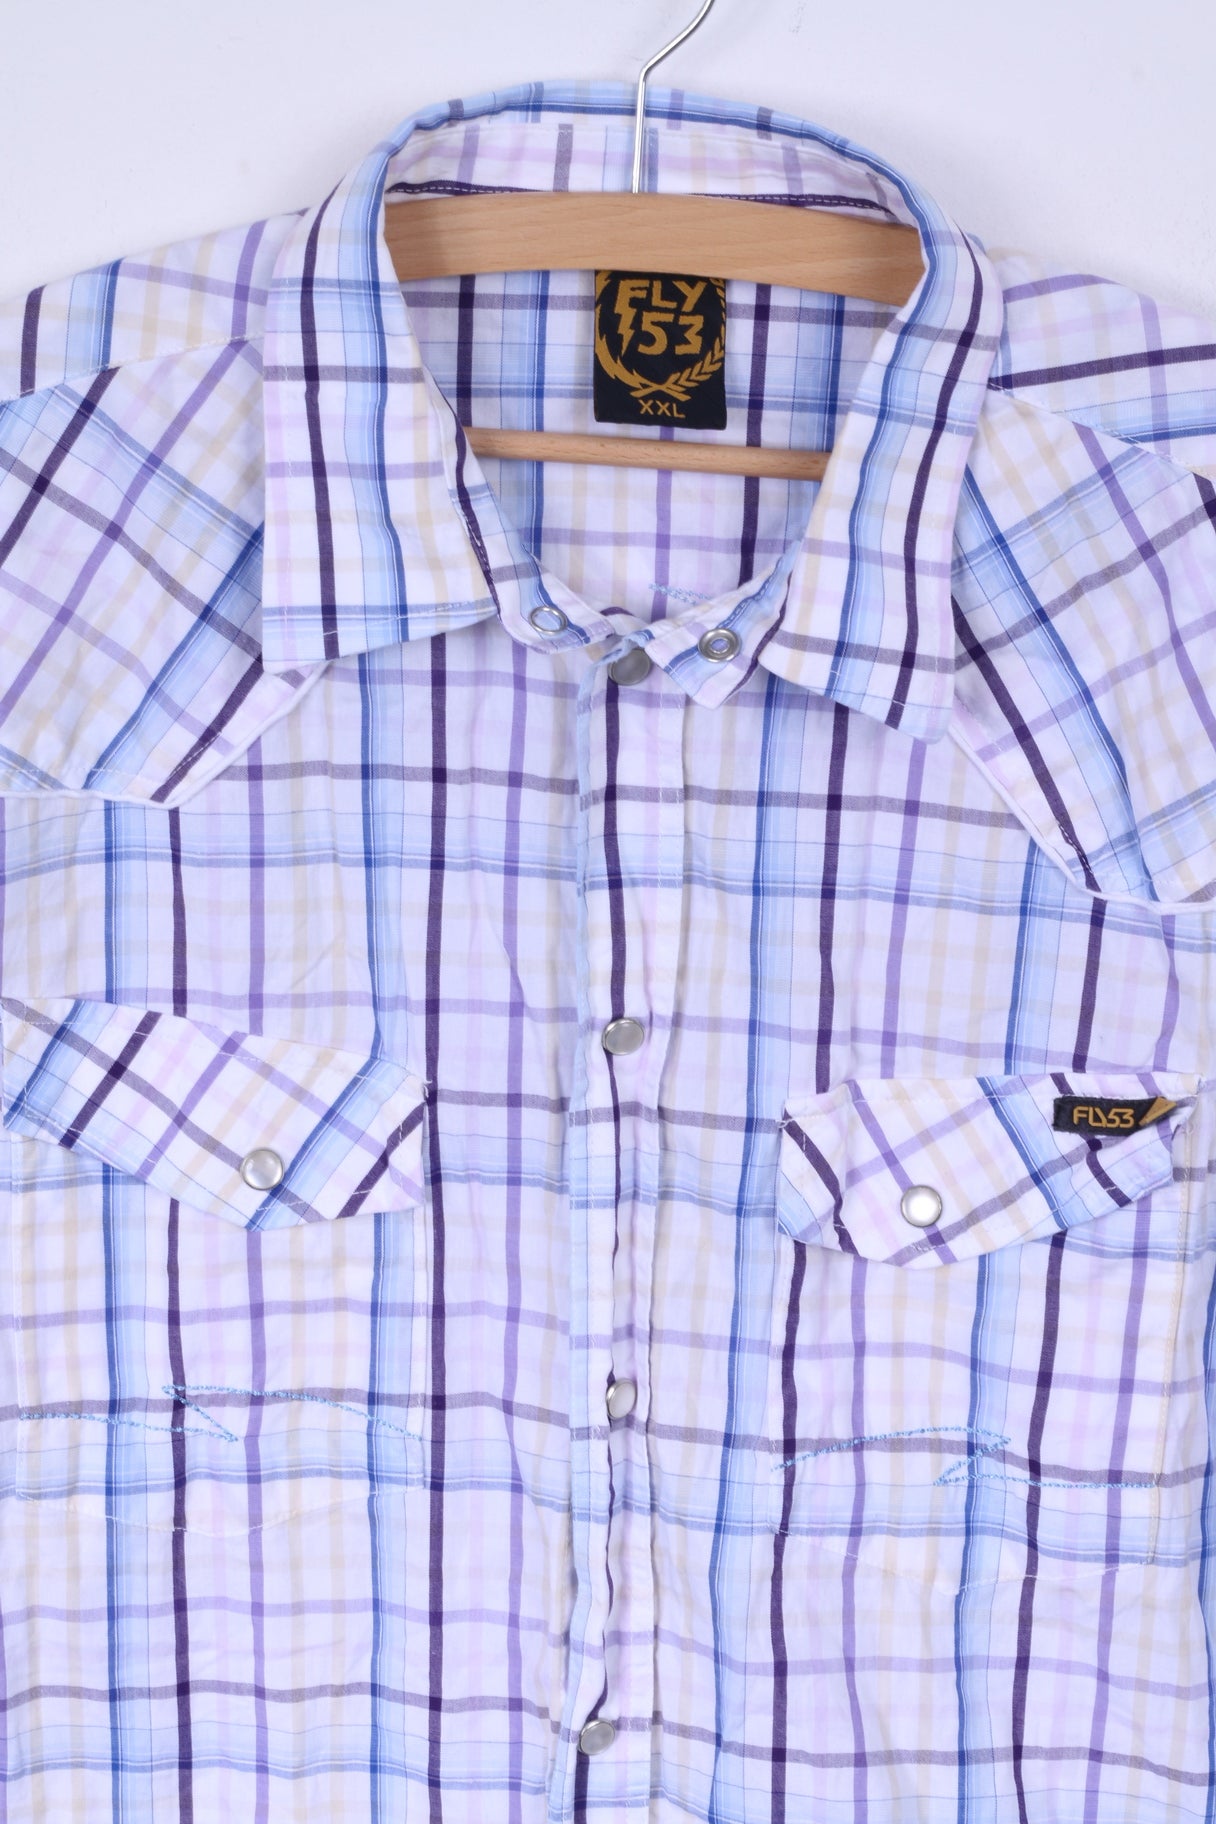 FLY 53 Mens XXL (M)  Casual Shirt White  Blue Checkered Cotton Short Sleeve